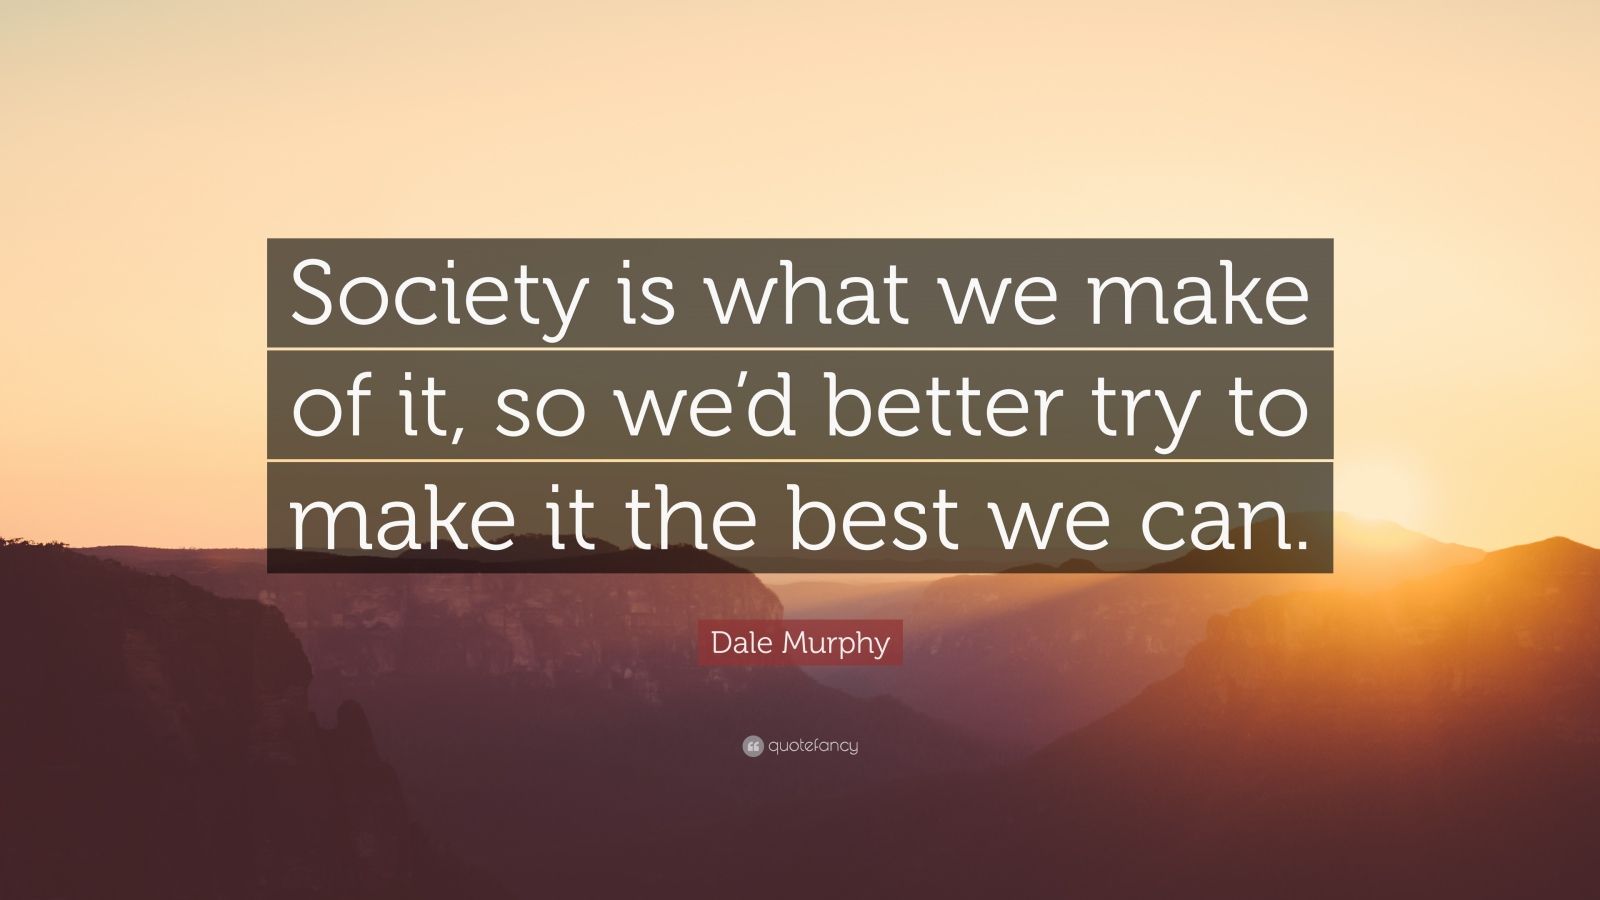 Dale Murphy Quote: “Society is what we make of it, so we'd better